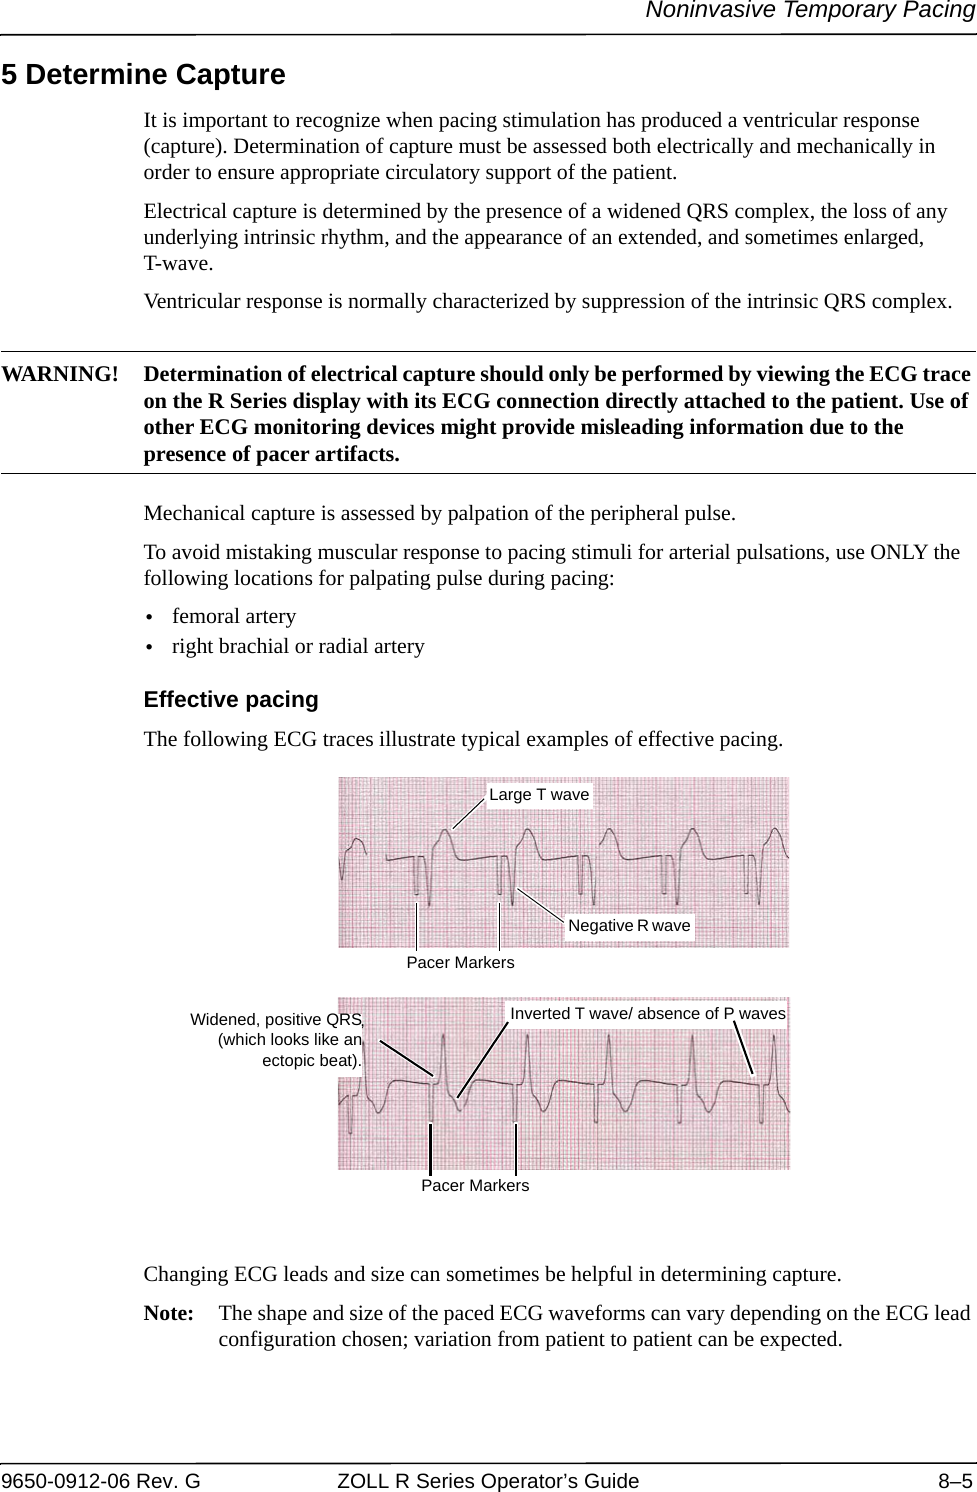 Noninvasive Temporary Pacing9650-0912-06 Rev. G ZOLL R Series Operator’s Guide 8–55 Determine CaptureIt is important to recognize when pacing stimulation has produced a ventricular response (capture). Determination of capture must be assessed both electrically and mechanically in order to ensure appropriate circulatory support of the patient. Electrical capture is determined by the presence of a widened QRS complex, the loss of any underlying intrinsic rhythm, and the appearance of an extended, and sometimes enlarged, T-wave.Ventricular response is normally characterized by suppression of the intrinsic QRS complex.WARNING! Determination of electrical capture should only be performed by viewing the ECG trace on the R Series display with its ECG connection directly attached to the patient. Use of other ECG monitoring devices might provide misleading information due to the presence of pacer artifacts.Mechanical capture is assessed by palpation of the peripheral pulse.To avoid mistaking muscular response to pacing stimuli for arterial pulsations, use ONLY the following locations for palpating pulse during pacing:•femoral artery•right brachial or radial arteryEffective pacingThe following ECG traces illustrate typical examples of effective pacing.Changing ECG leads and size can sometimes be helpful in determining capture. Note: The shape and size of the paced ECG waveforms can vary depending on the ECG lead configuration chosen; variation from patient to patient can be expected.Large T waveNegative R wave Inverted T wave/ absence of P wavesPacer MarkersPacer MarkersWidened, positive QRS(which looks like anectopic beat).,